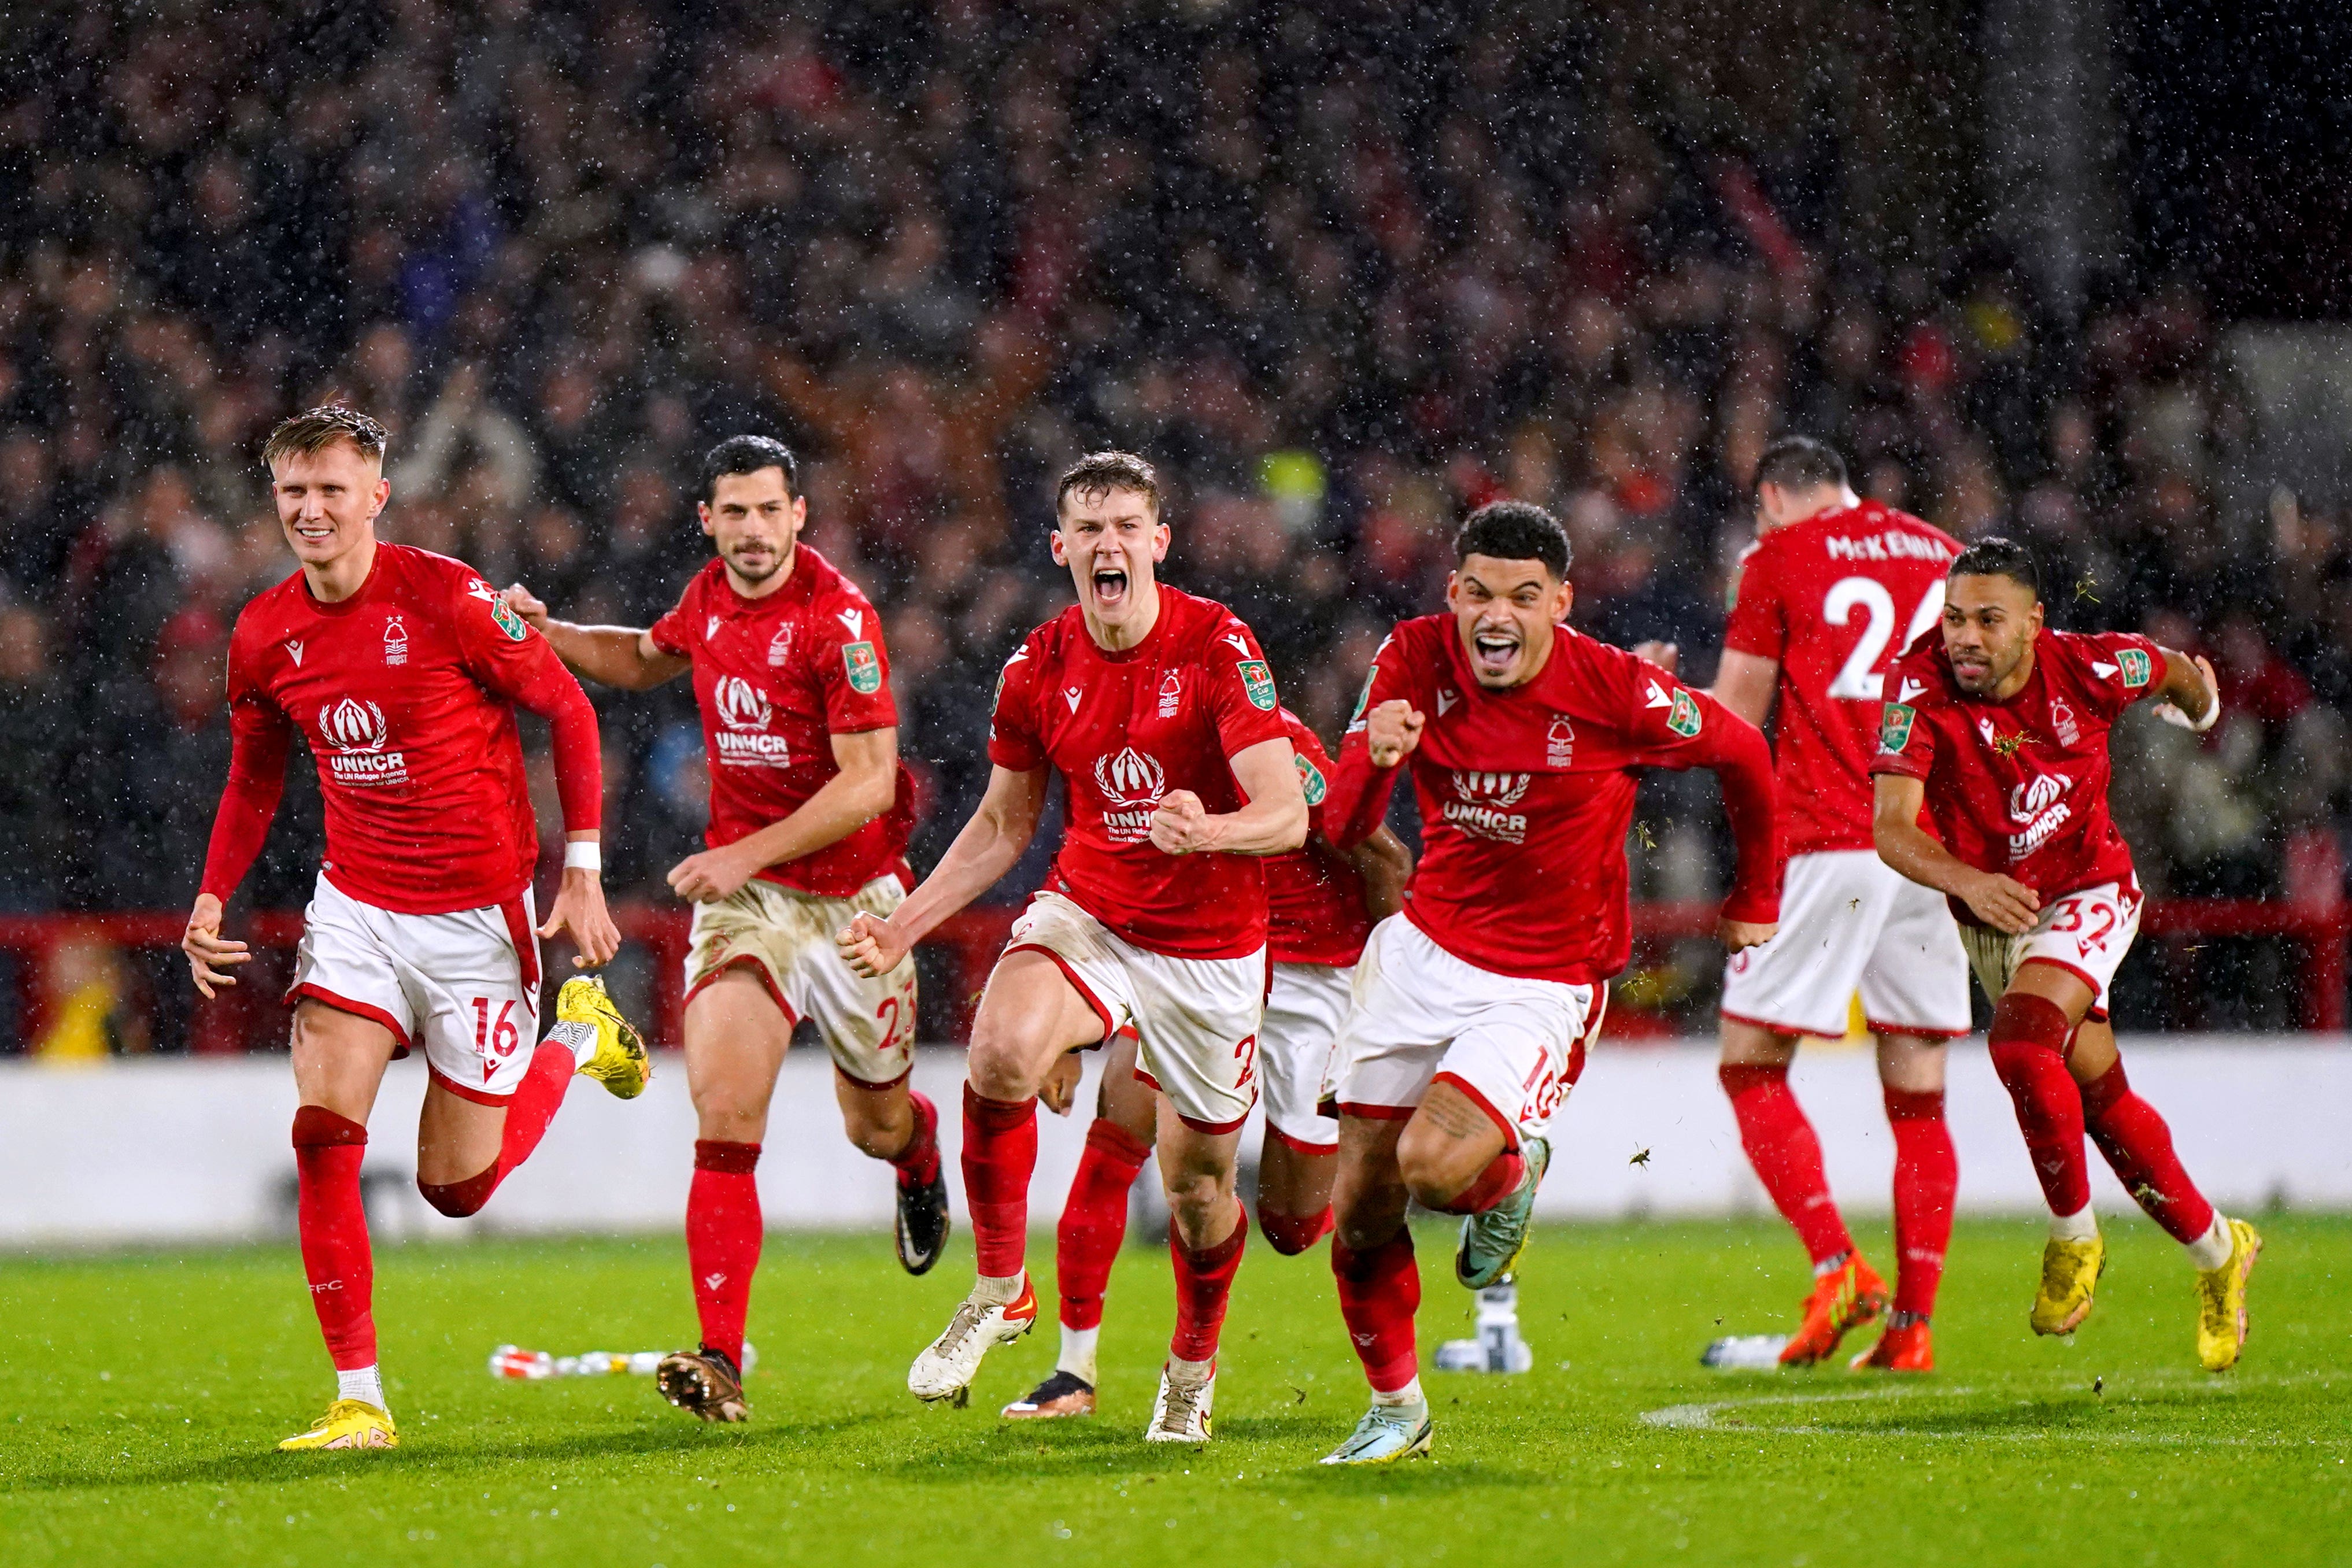 Nottingham Forest players celebrate after winning the penalty shoot-out against Wolves (Tim Goode/PA)